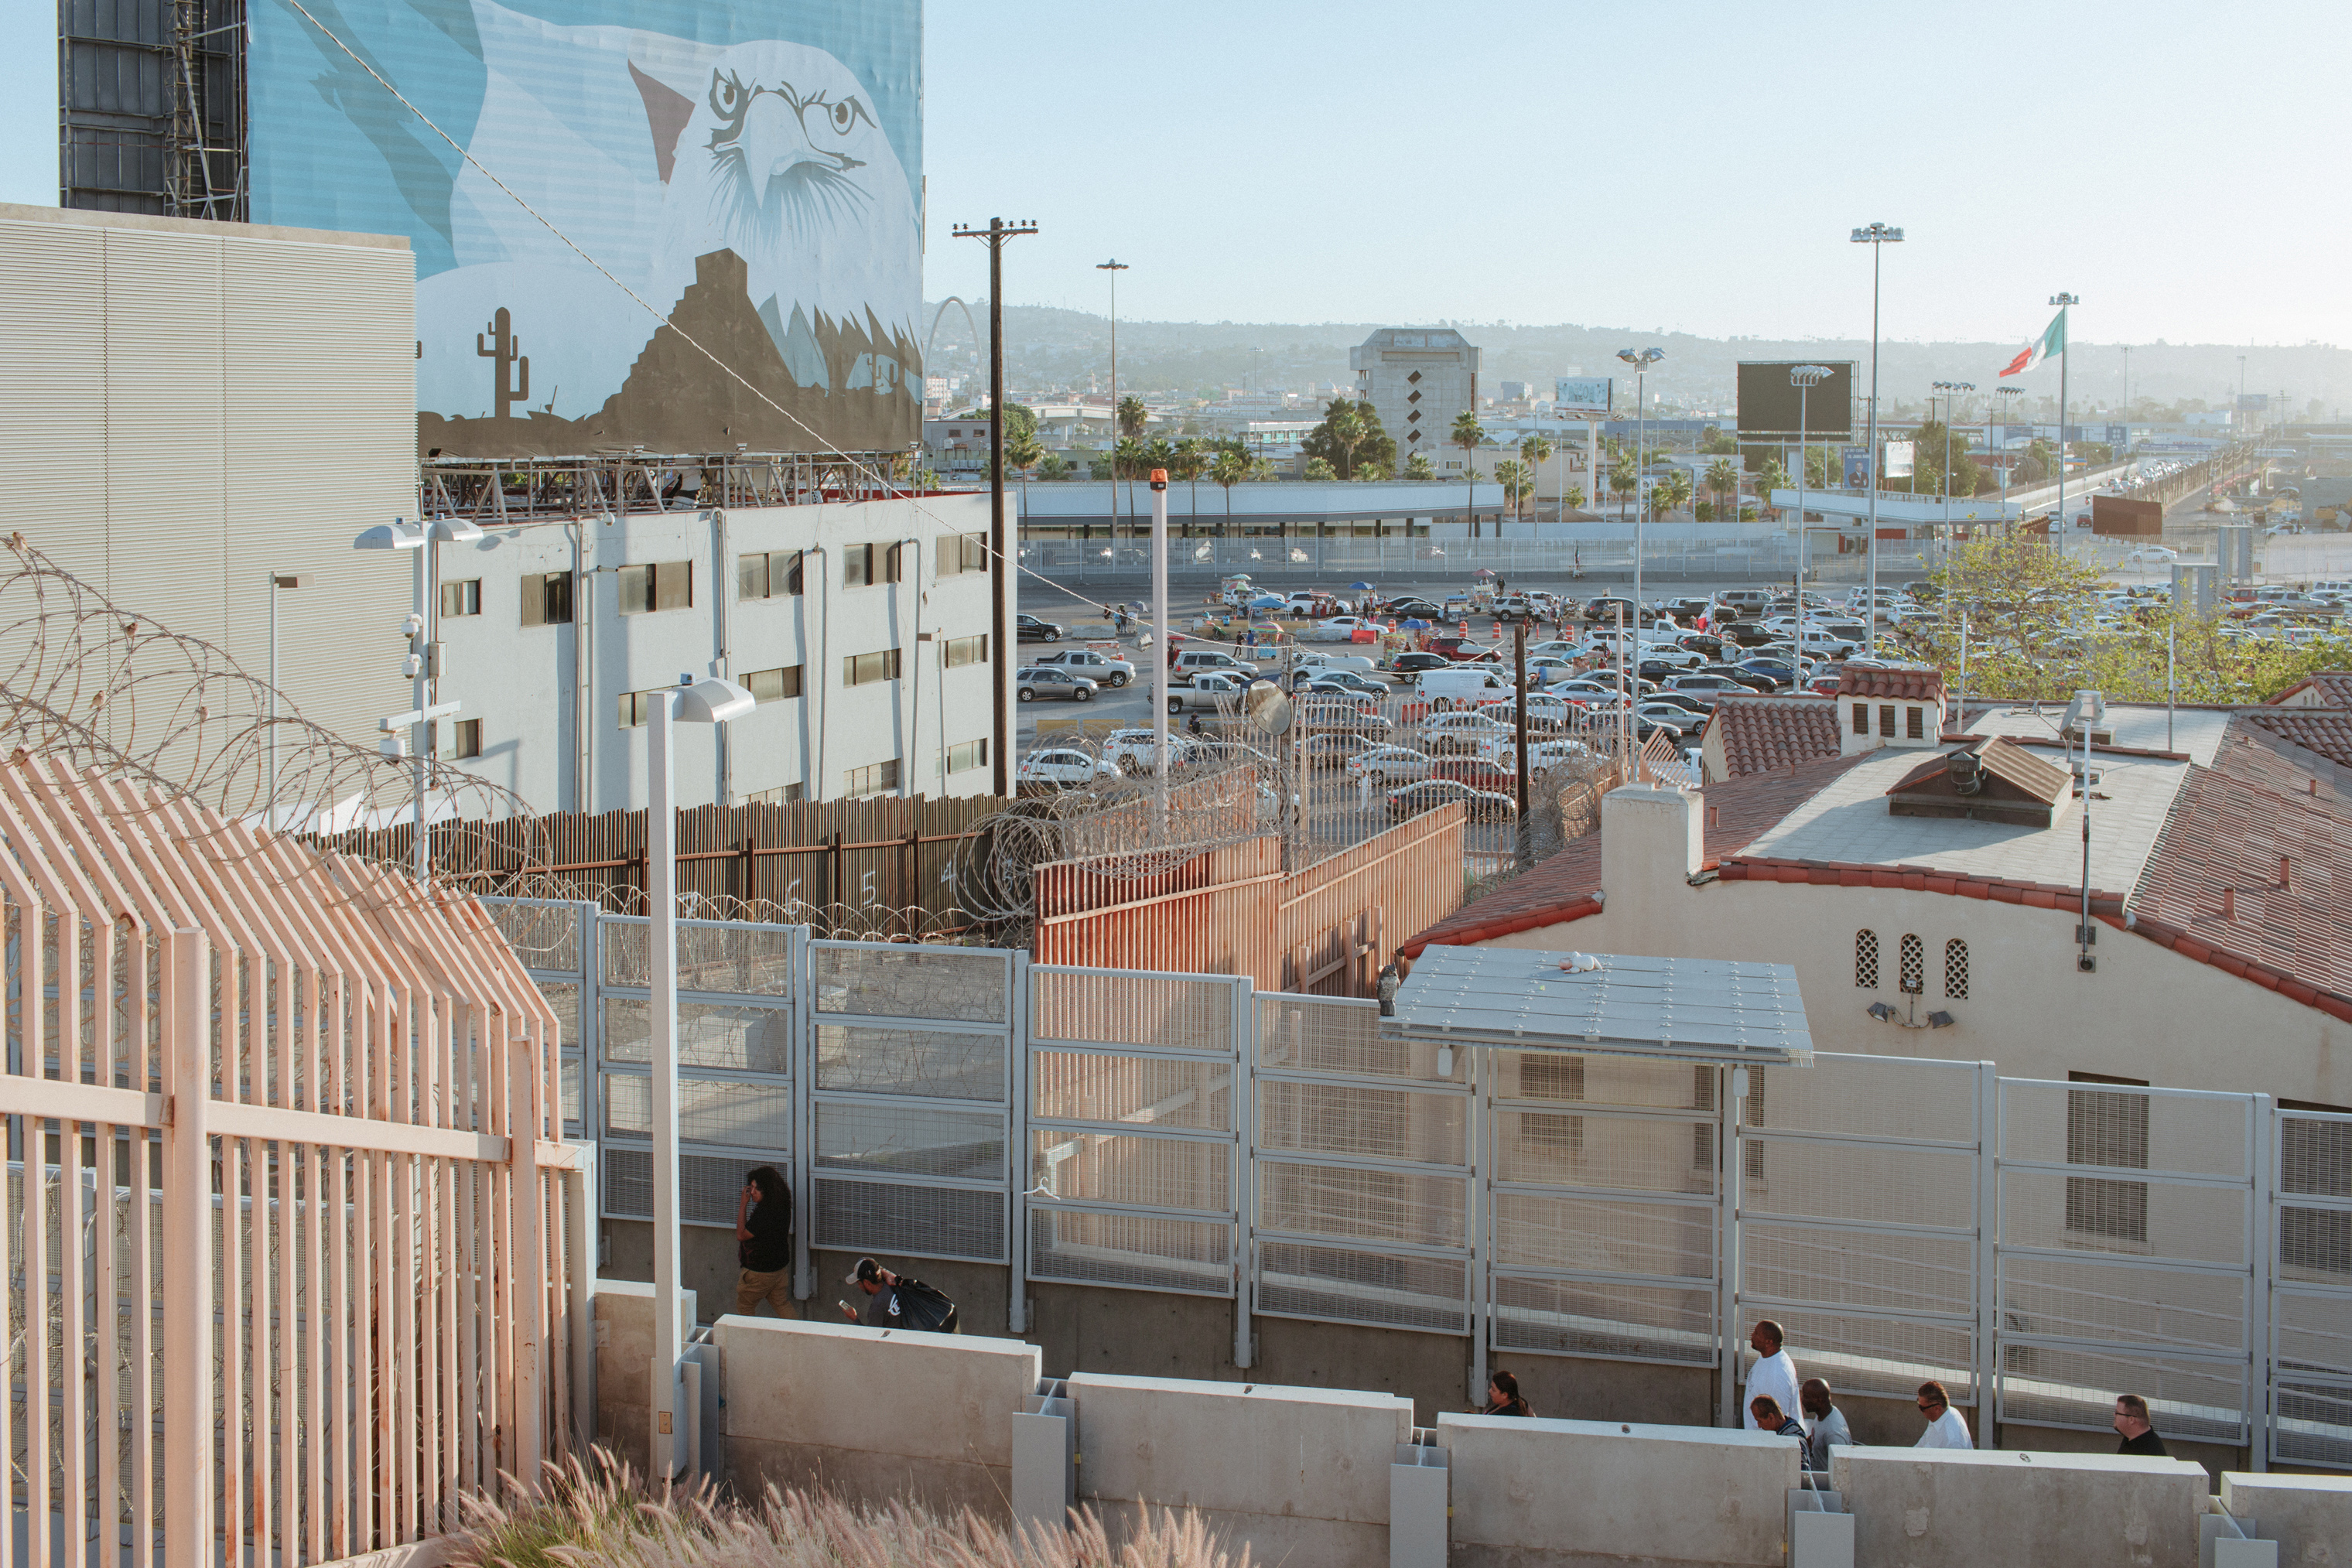 The San Ysidro Border is the largest crossing between San Diego and Tijuana. View from San Deigo, Calif. (Elliot Ross)